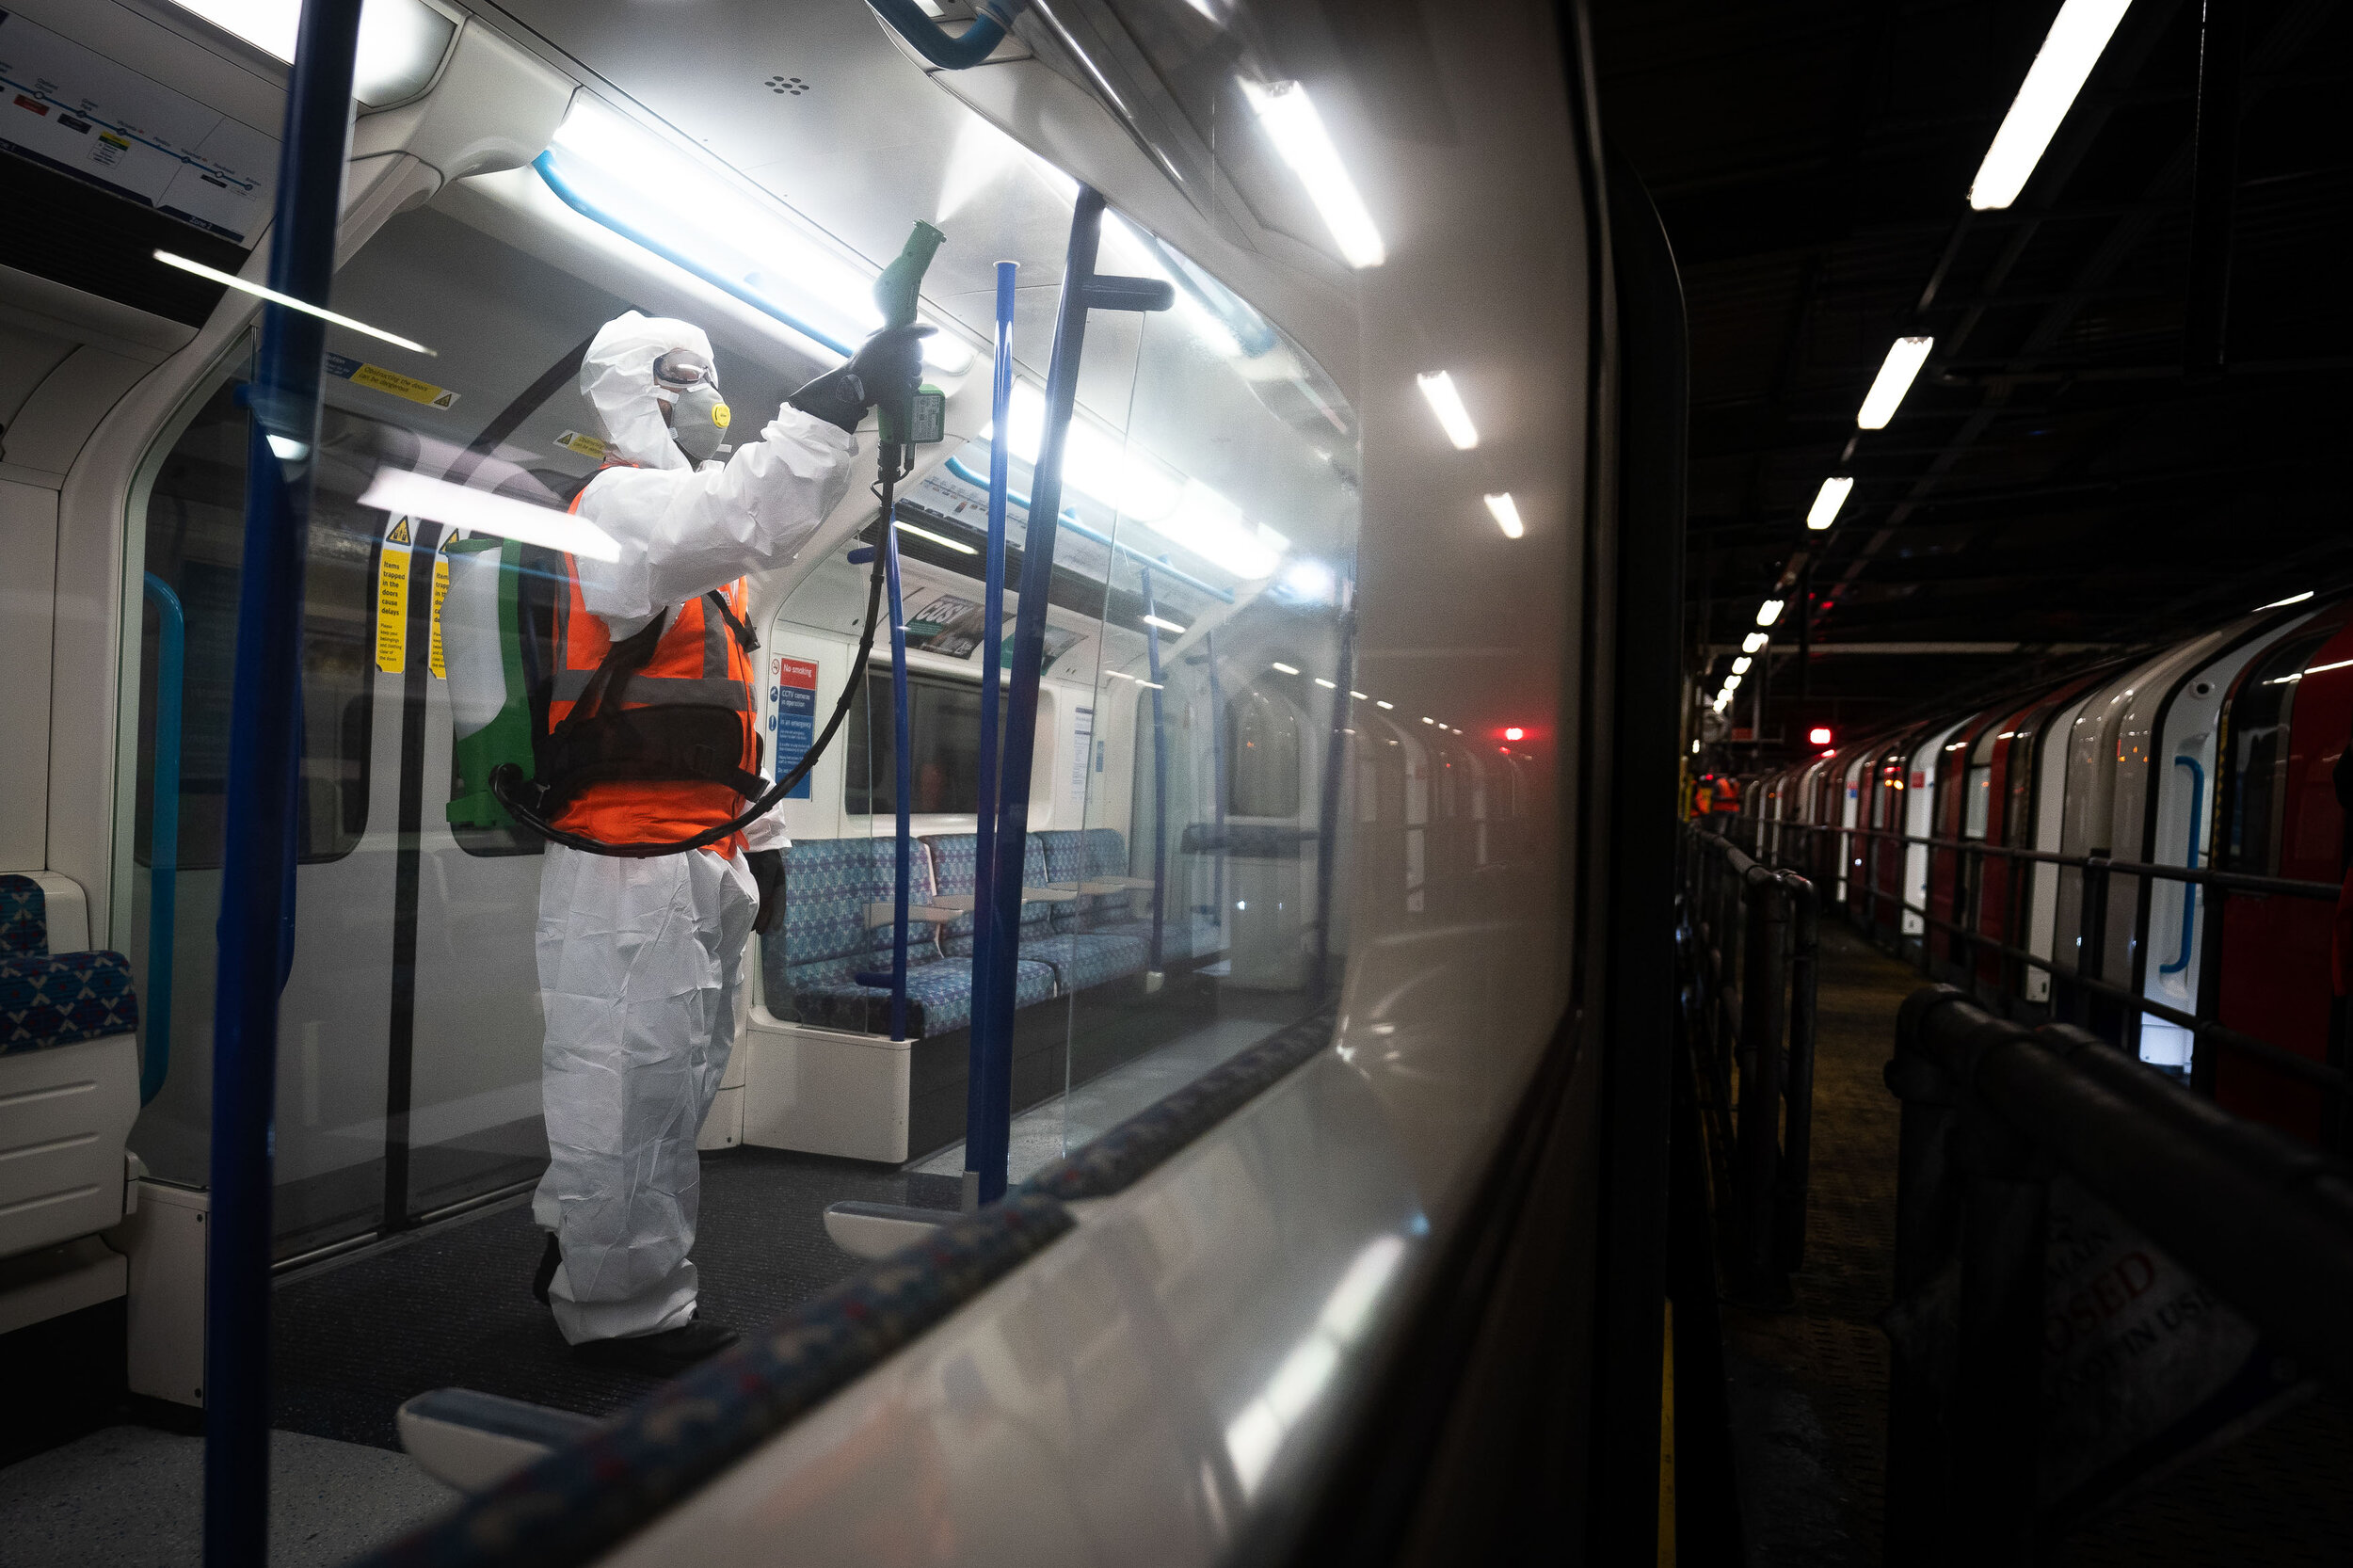  A night shift with Noureddine Aouf, a TFL worker, as he deep cleans and sprays the Victoria Line tube trains with an antiviral solution at a Underground Depot in North London. Zoono-17 is a microbe shield surface sanitiser, which is 99.99% effective